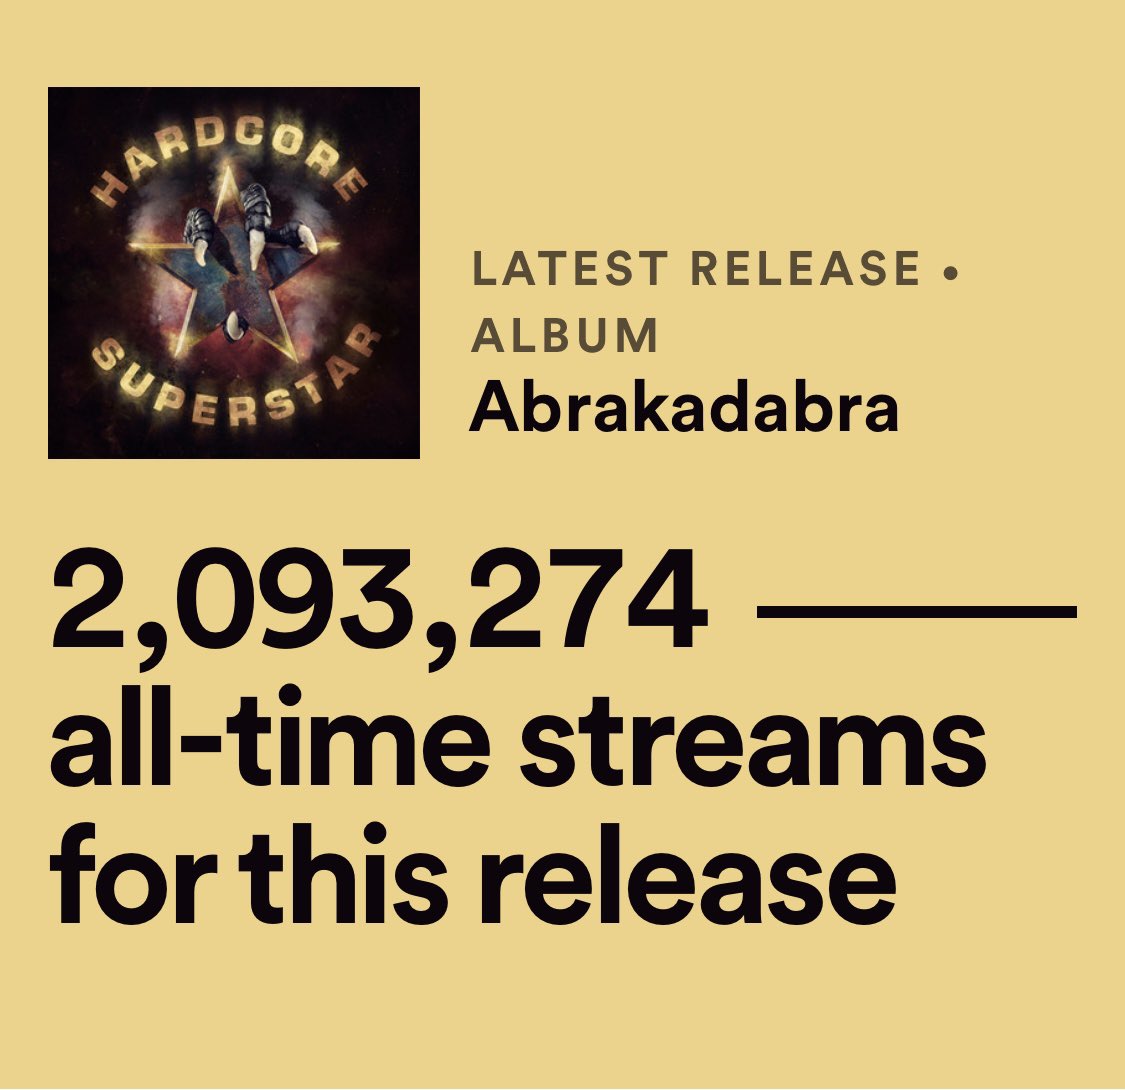 We’ve had over 2 million streams so far for #Abrakadabra, on Spotify alone!! 😳 You guys are unbelievable!! Thank you all so much for the love and support, it means the world to us!! orcd.co/hcssabrakadabra #hardcoresuperstar #hcss